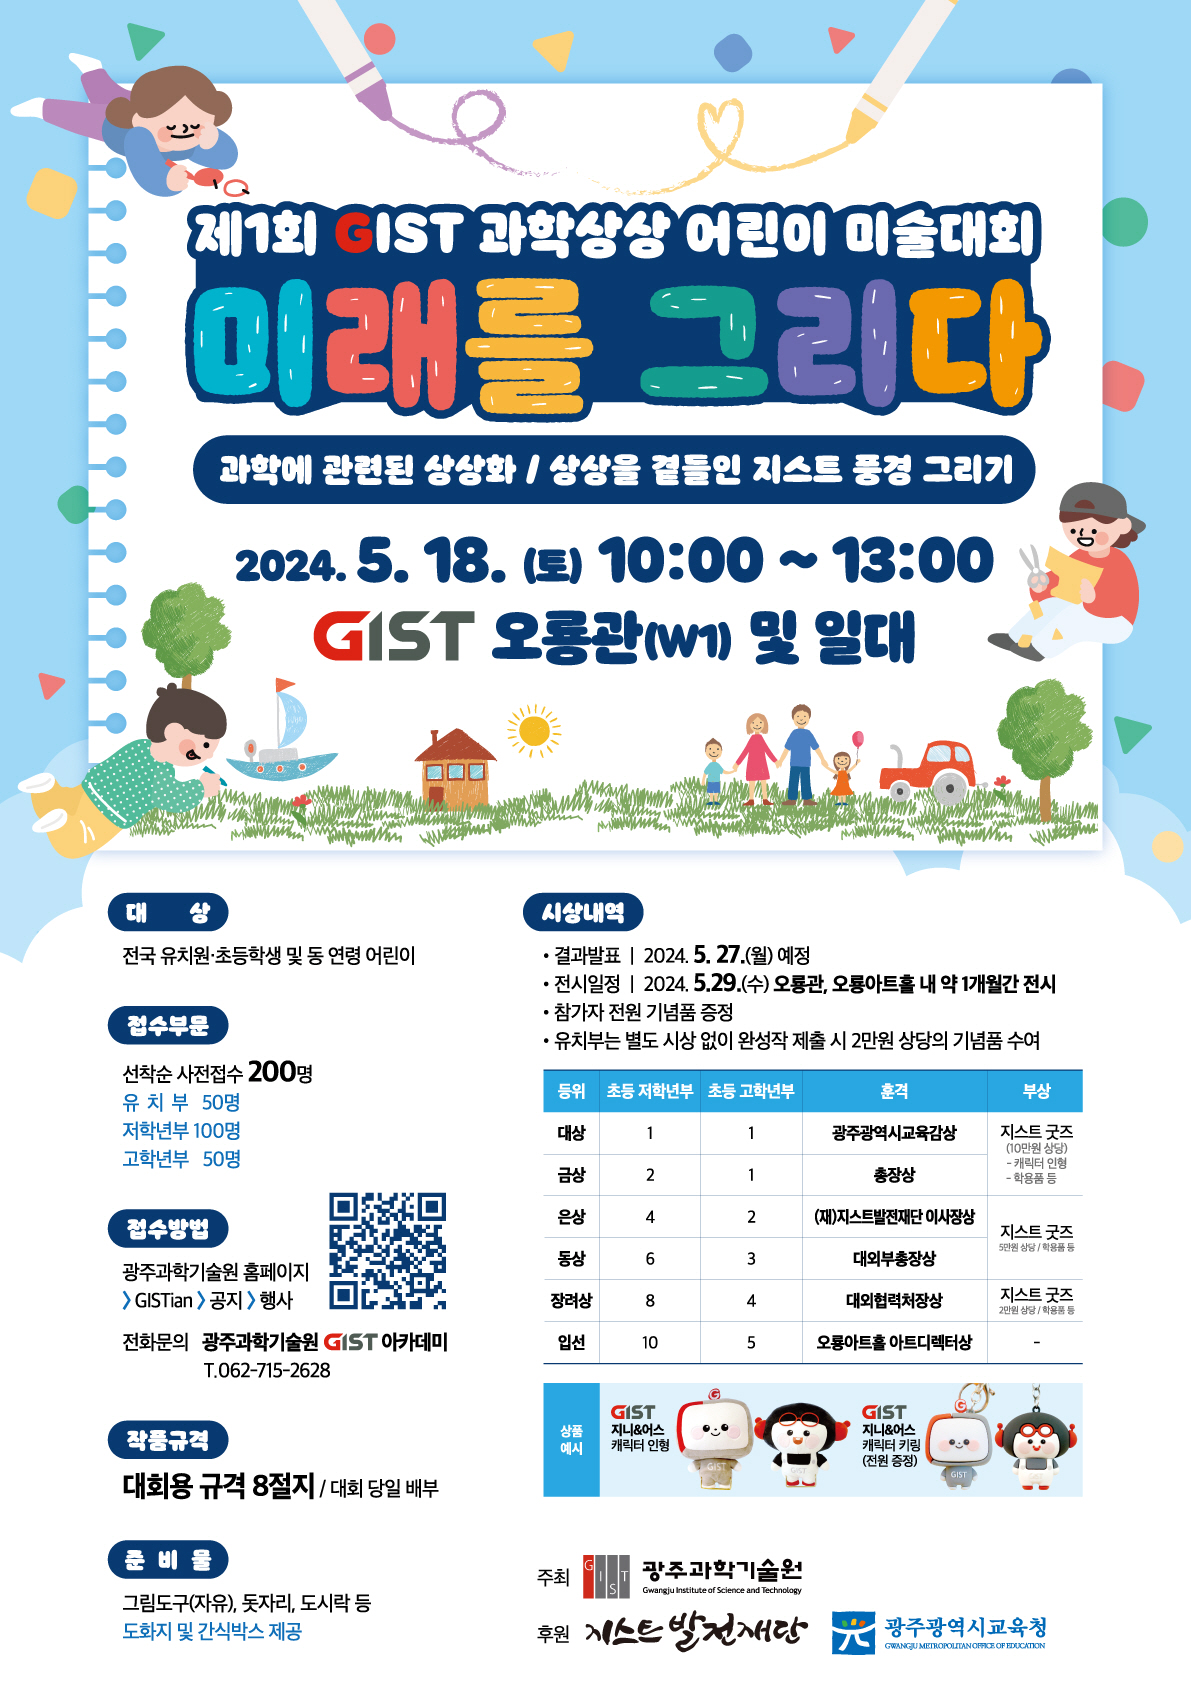 The 1st GIST Science Imagination Children’s Art Contest will be held on Saturday, May 18th on GIST campus... Application accepted for 200 kindergarten and elementary school students 이미지